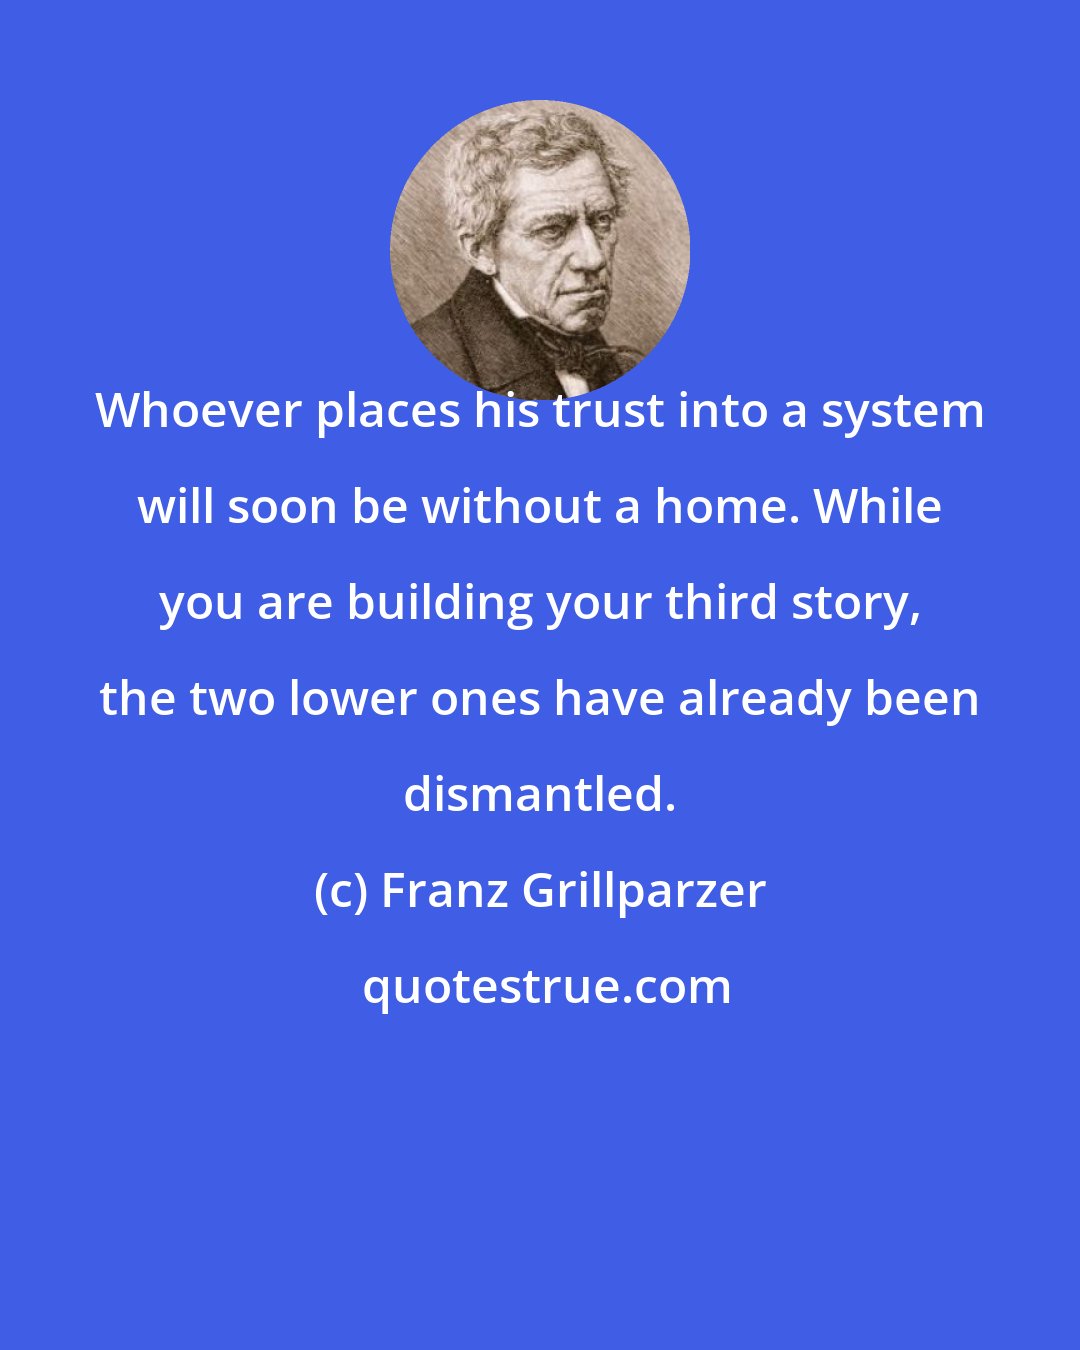 Franz Grillparzer: Whoever places his trust into a system will soon be without a home. While you are building your third story, the two lower ones have already been dismantled.